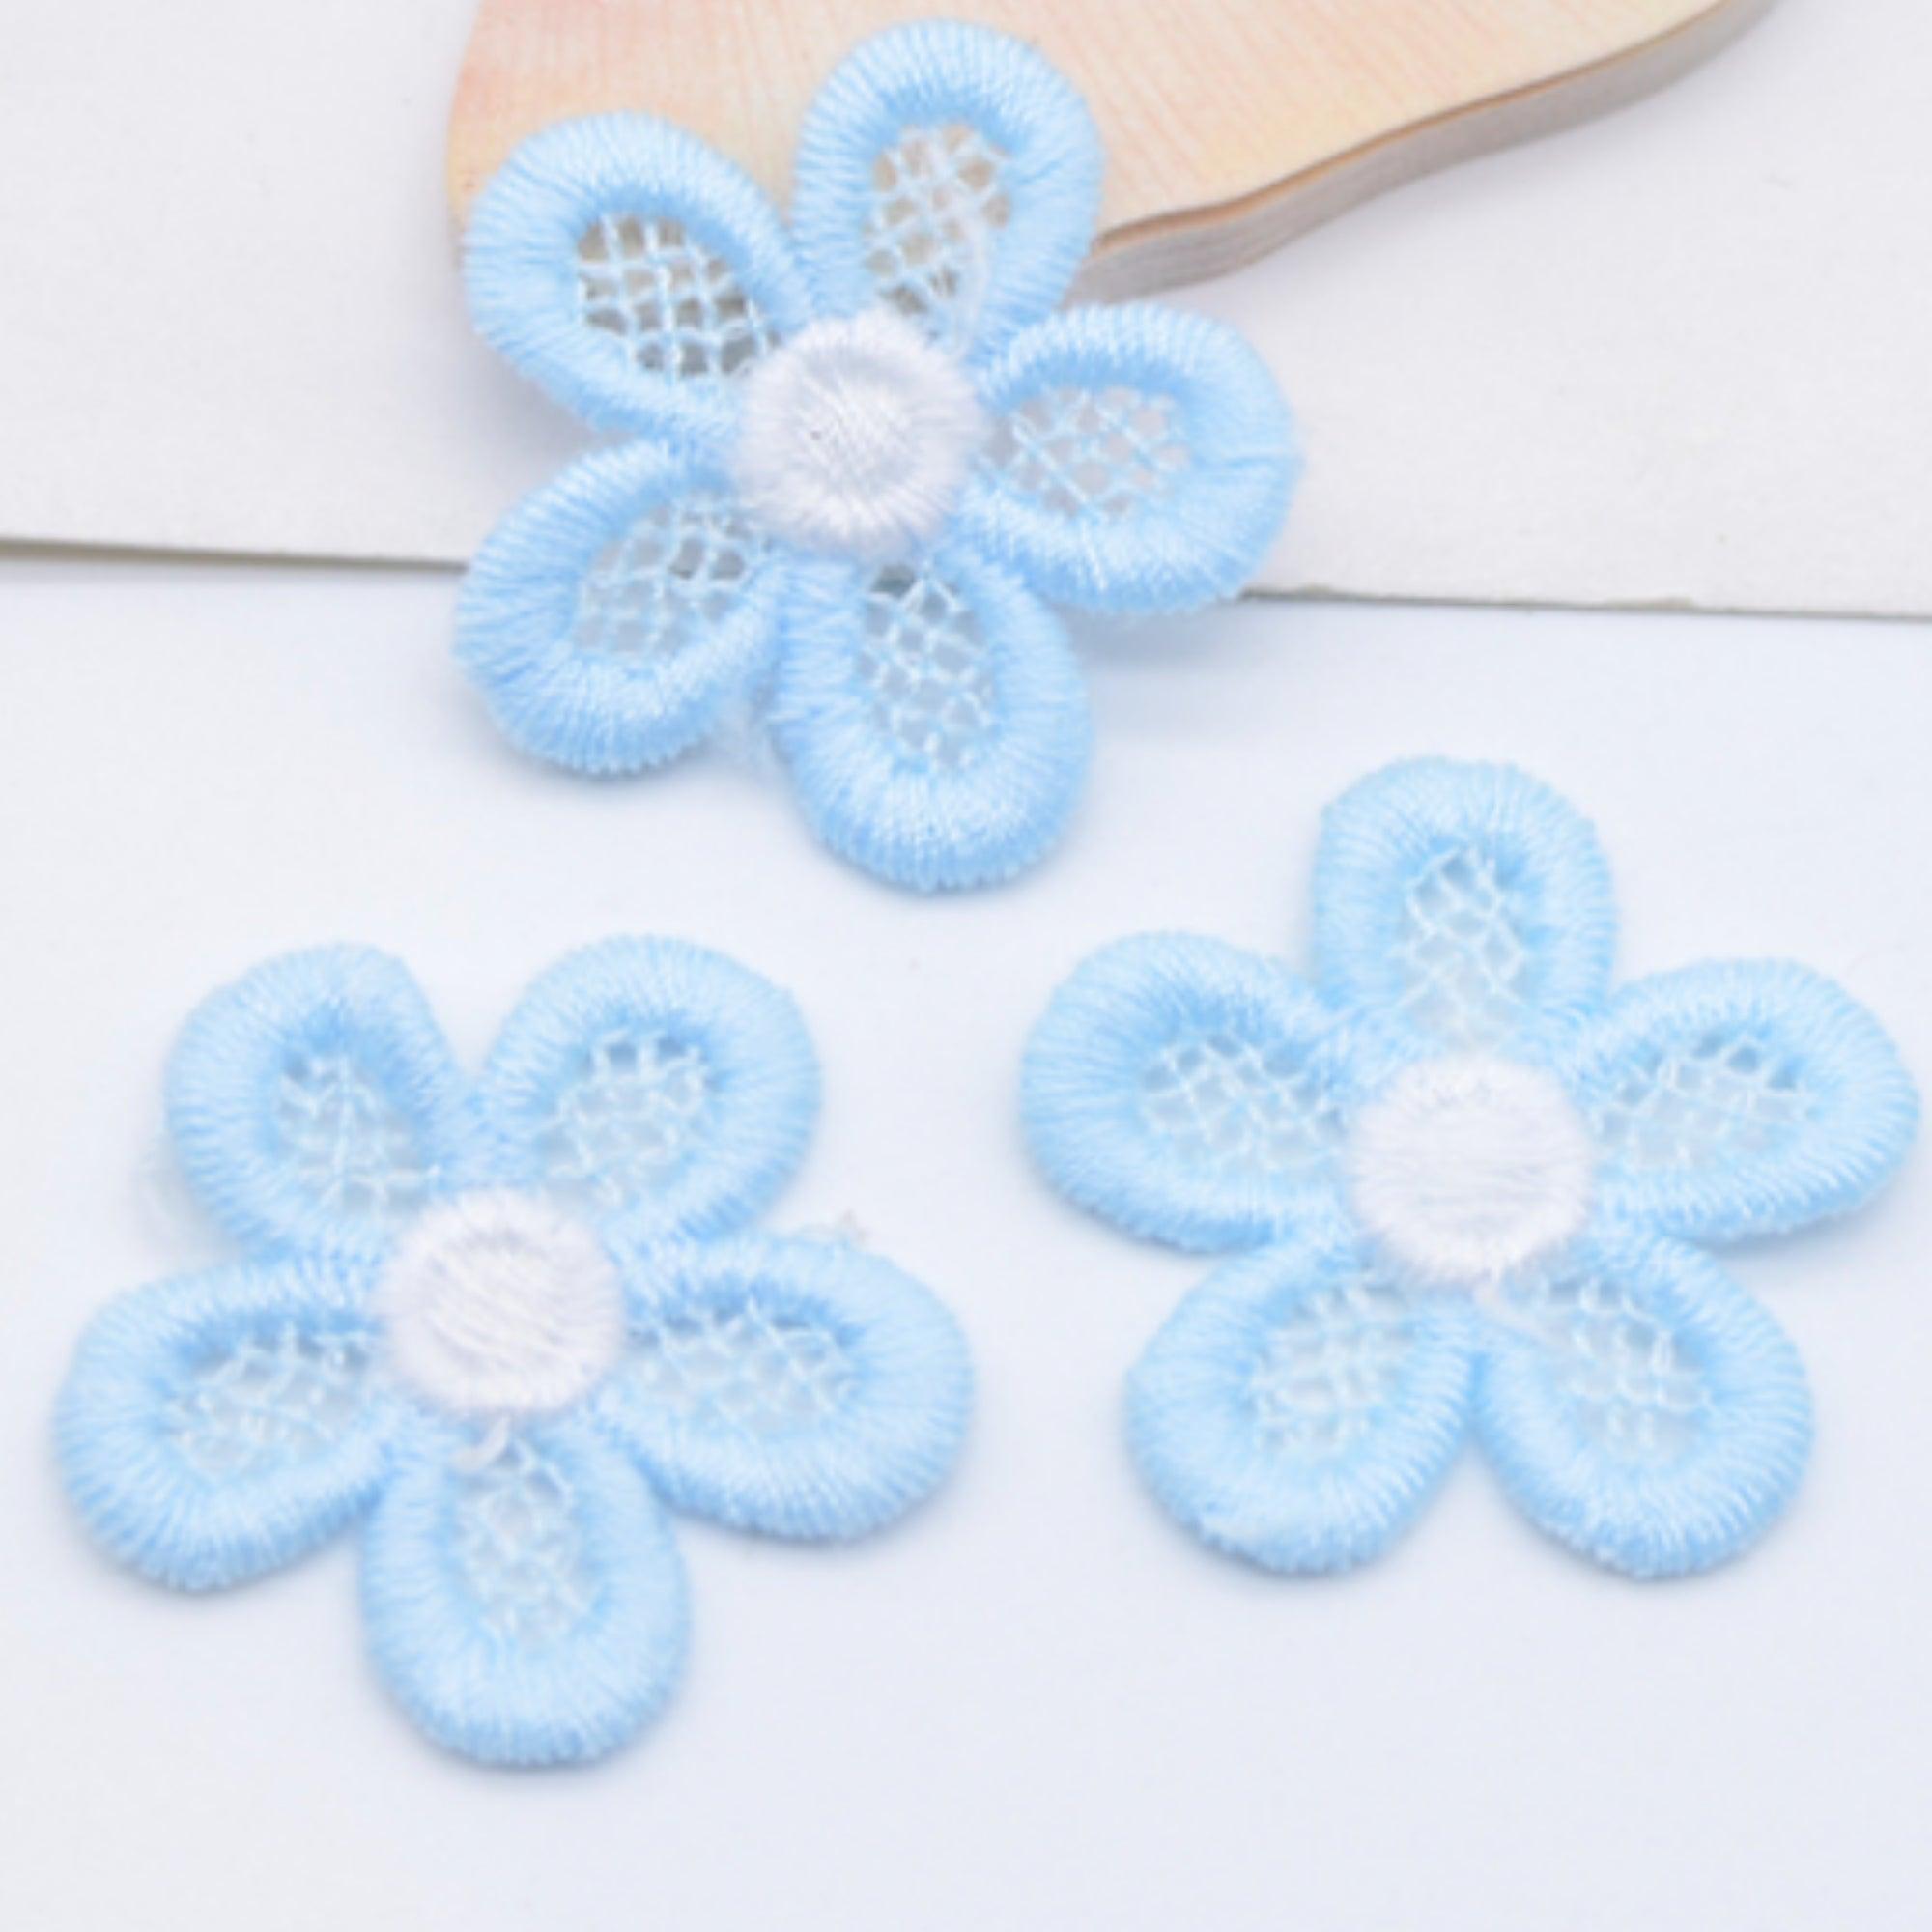 Embroidered Daisies Collection Blue & White 1" Scrapbook Flower Embellishments by SSC Designs - 10 Pieces